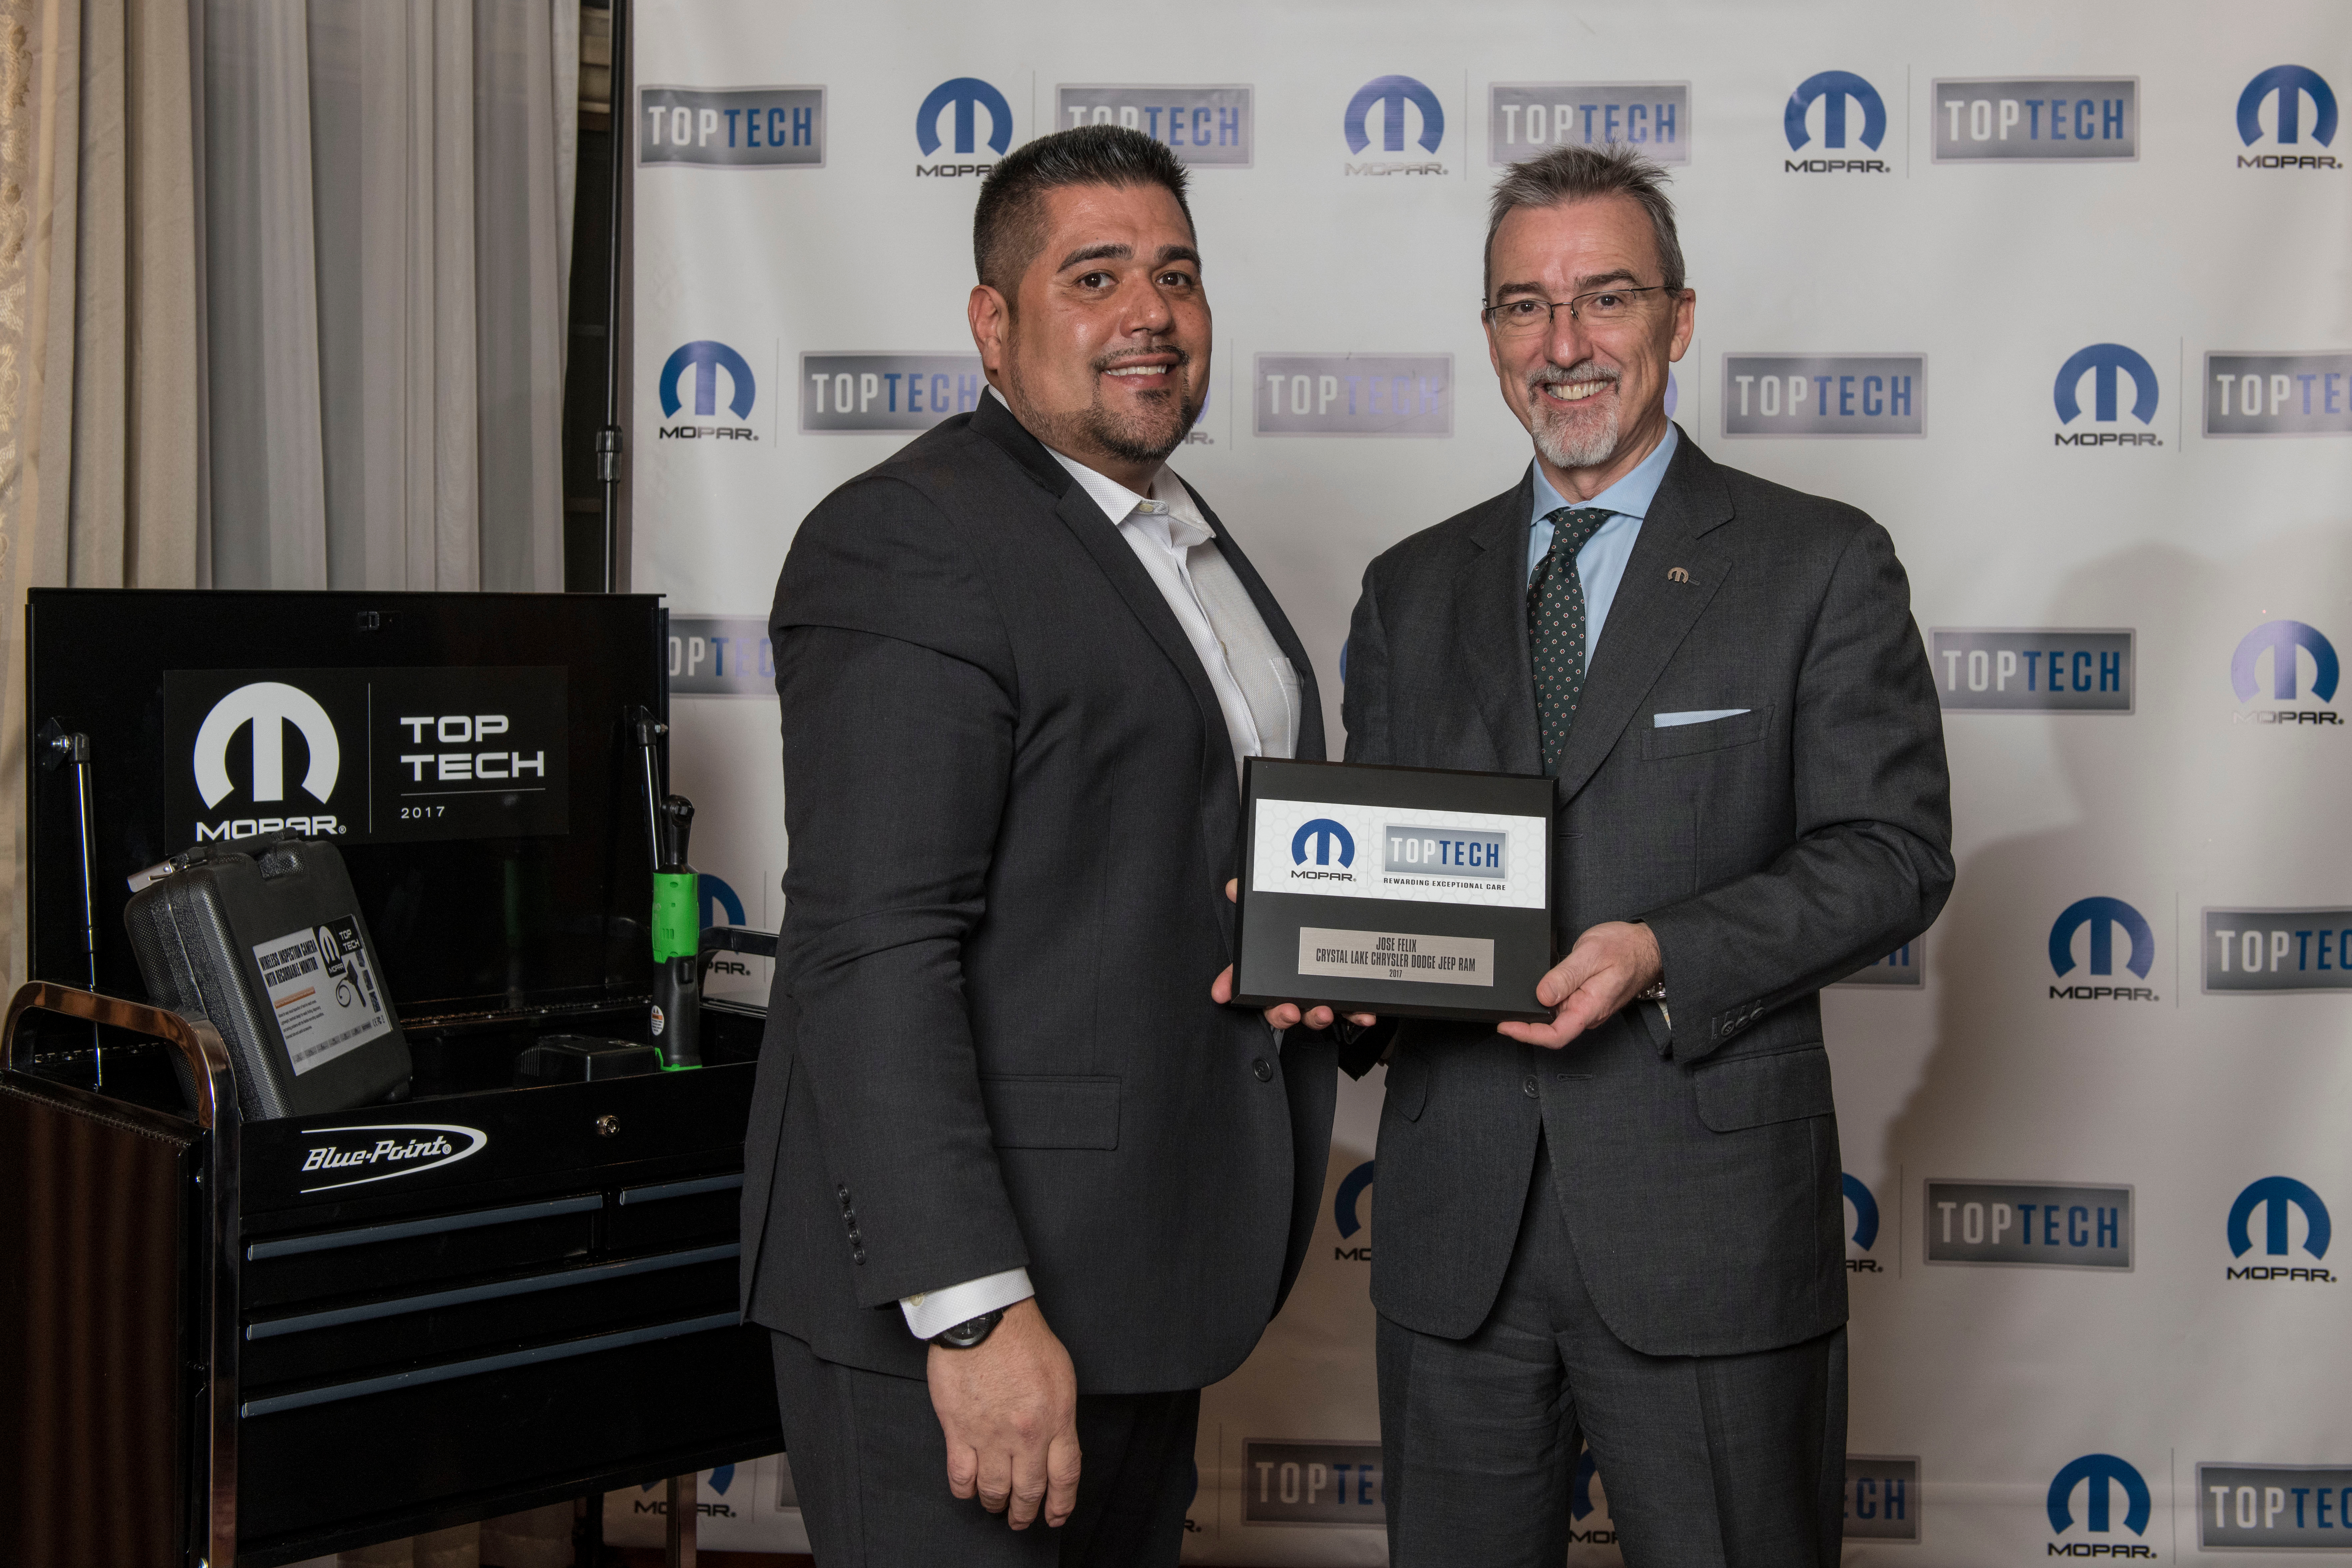 Pietro Gorlier (right), Head of Parts and Service (Mopar), FCA, presents Jose Felix, a technician at Crystal Lake Chrysler Jeep® Dodge Ram in Illinois, with a Mopar “Top Tech” award. The program recognizes elite dealership technicians, with only 100 Mopar “Top Tech” award winners chosen from more than 26,000 eligible candidates.